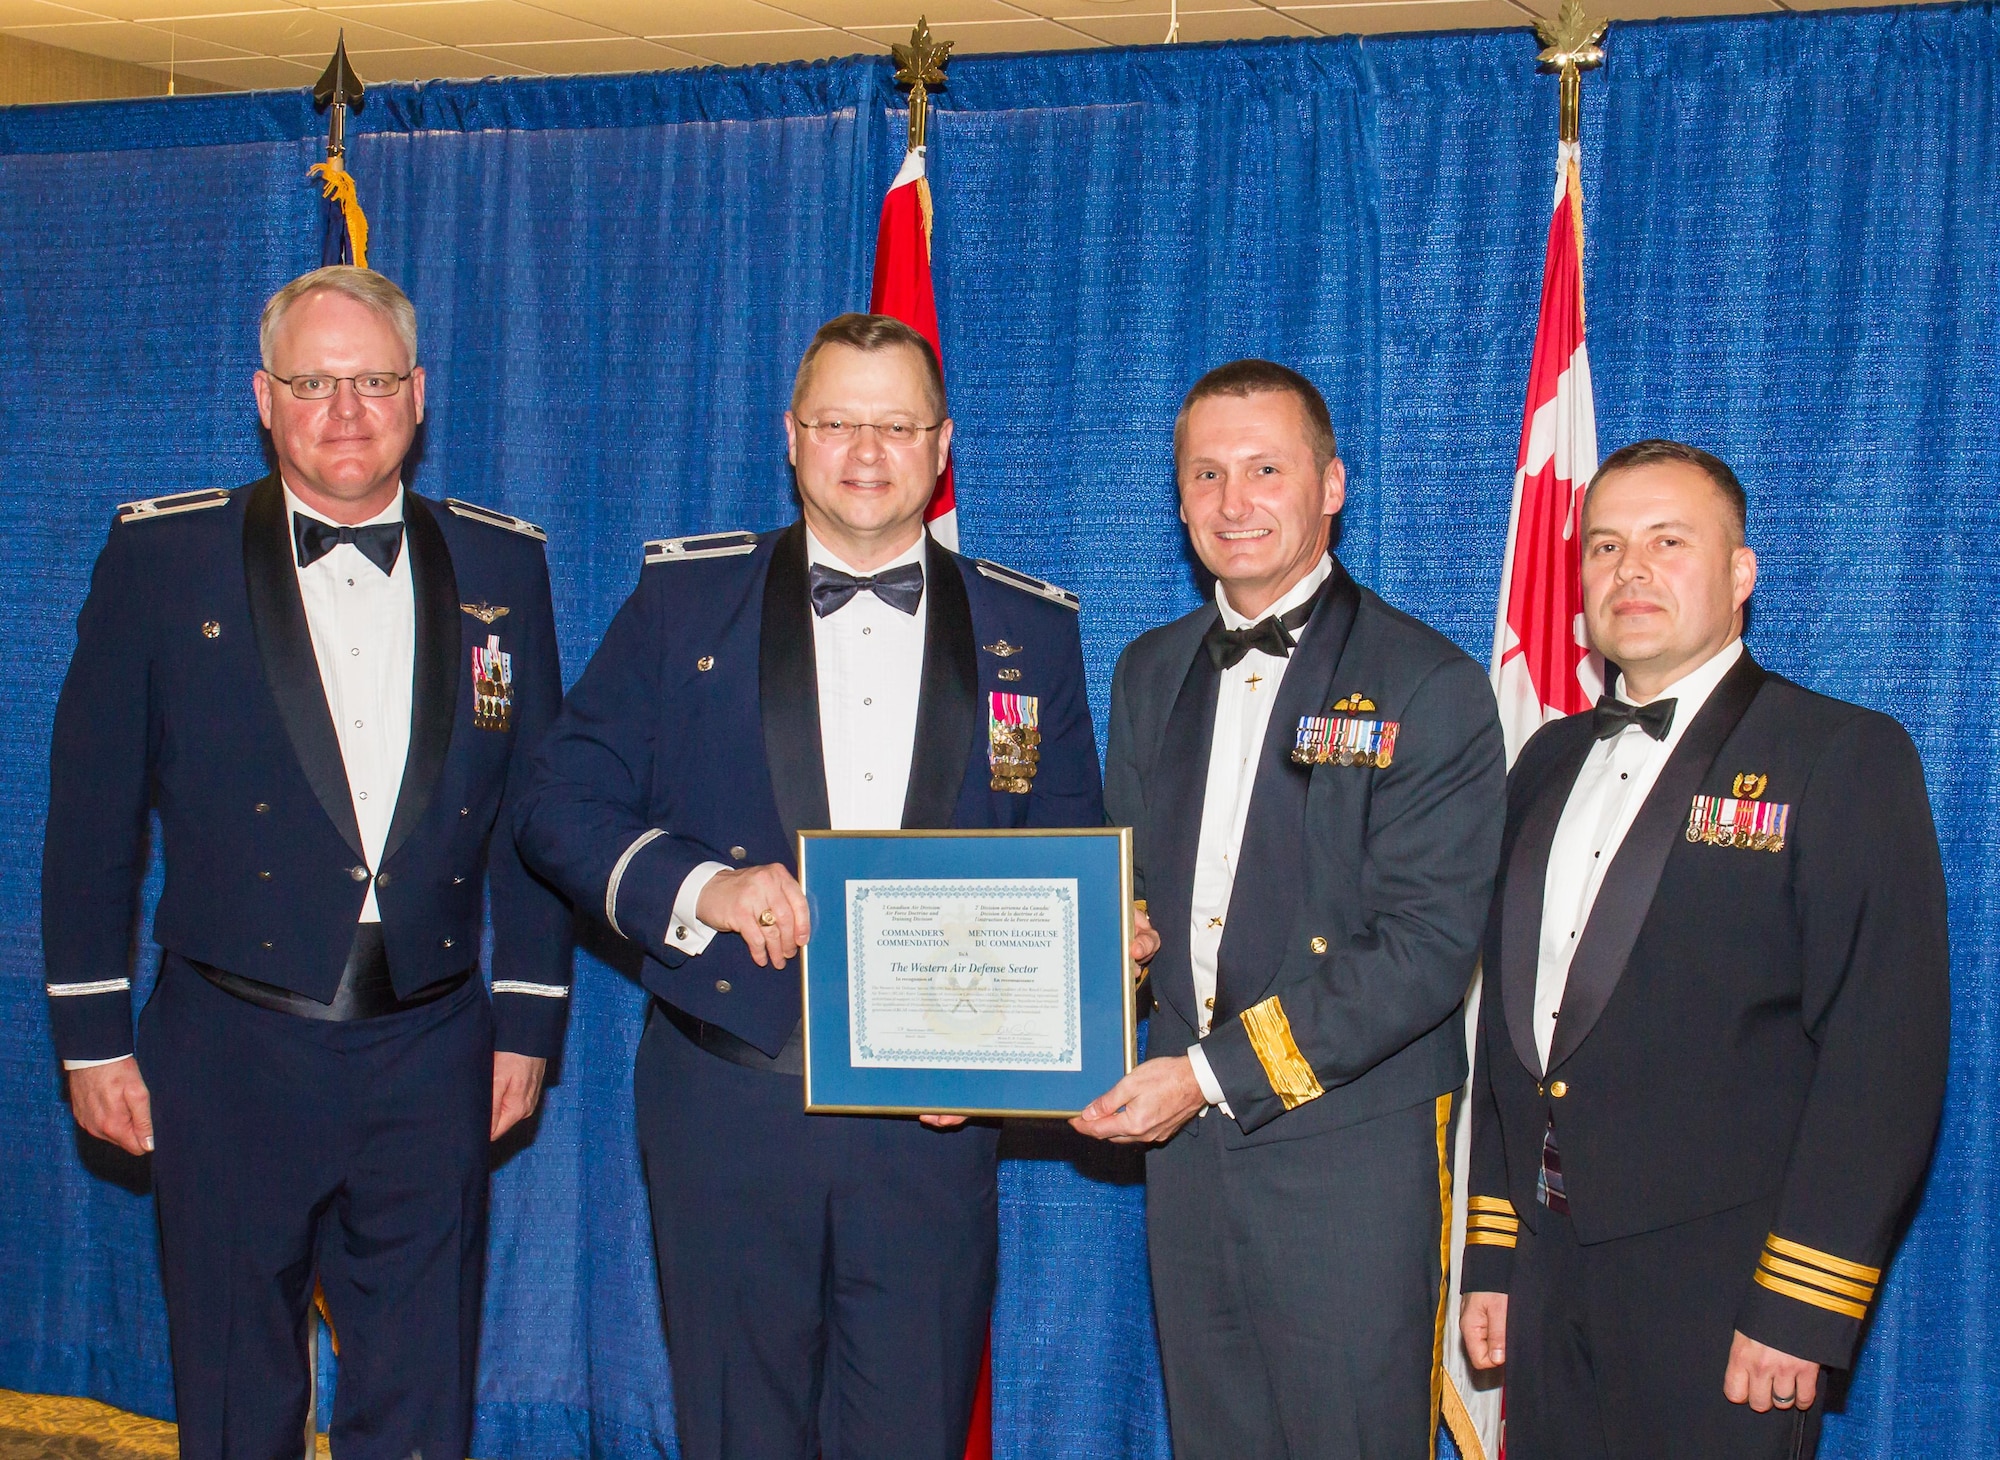 During the annual WADS Canadian Mess Dinner, Canadian Brig. Gen. David Cochrane (middle-right), 2nd Canadian Air Division commander, presents Col. Gregor J. Leist (middle-left), Western Air Defense Sector commander, with the 2nd CAD Commander’s Unit Commendation.  Canadian Lt. Col. Matt Wappler (right), WADS Canadian Detachment commander, nominated WADS for consistently providing critical live and virtual training to Canadian aerospace controllers from the 51 Aerospace Control and Warning (Operational Training) Squadron located at North Bay, Ontario. (Courtesy photo by Conrad Neumann III)